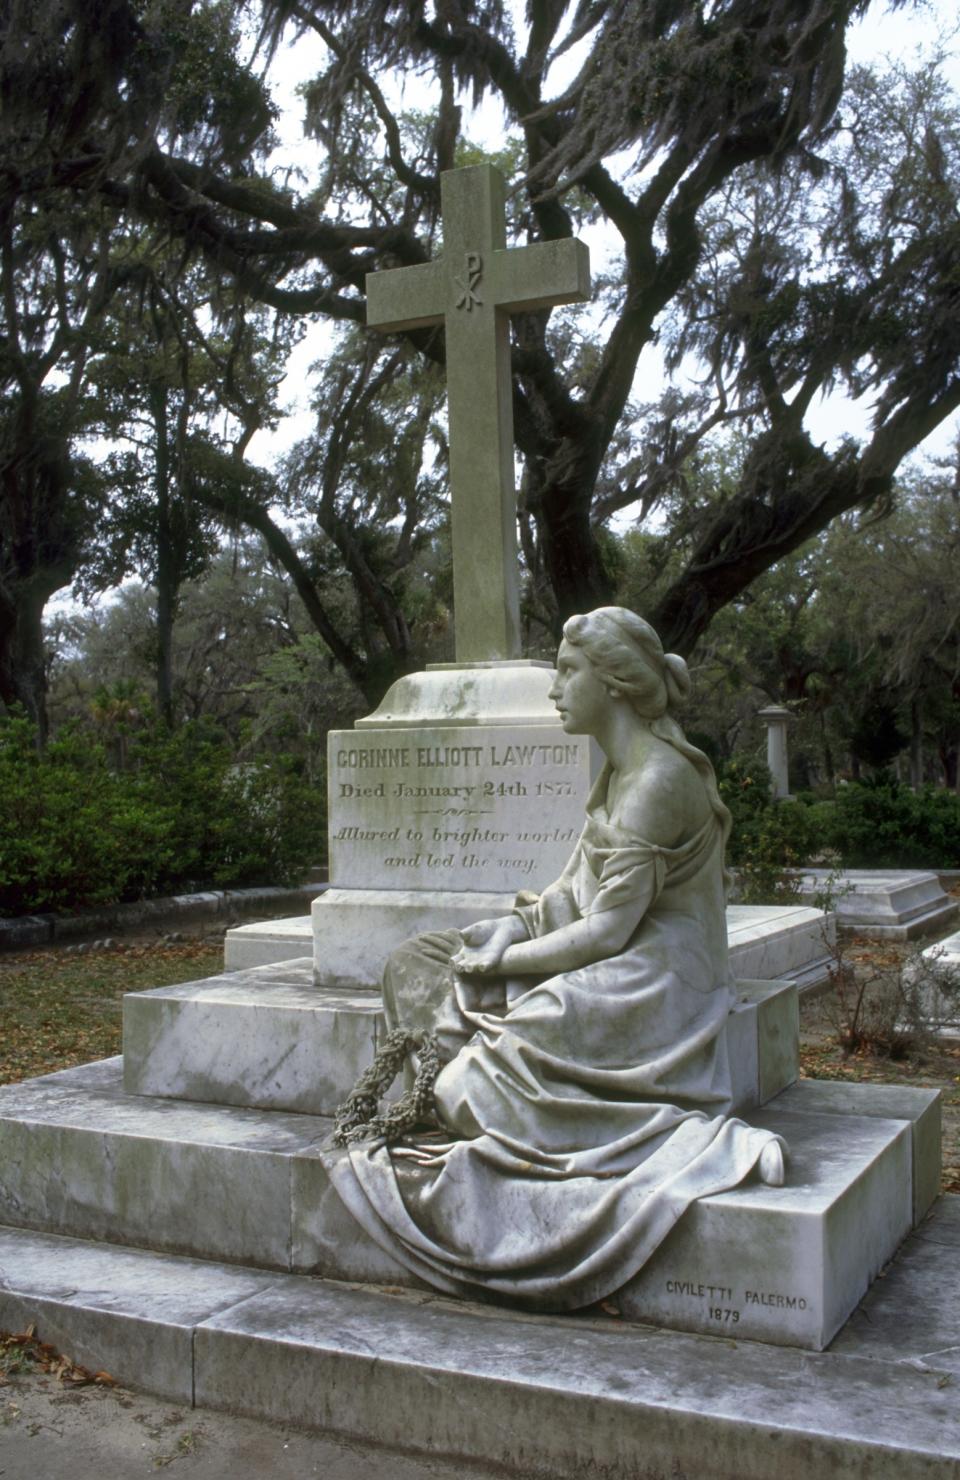 FILE - This undated file photo from the Savannah Convention and Visitors Bureau shows the Bonaventure Cemetery in Savannah, Ga. The cemetery, known for its spooky but romantic statues, memorials and more of those live oaks draping gravesites with Spanish moss, was also featured in “Midnight in the Garden of Good and Evil.” (AP Photo/Savannah Convention and Visitors Bureau, Erica Backus)